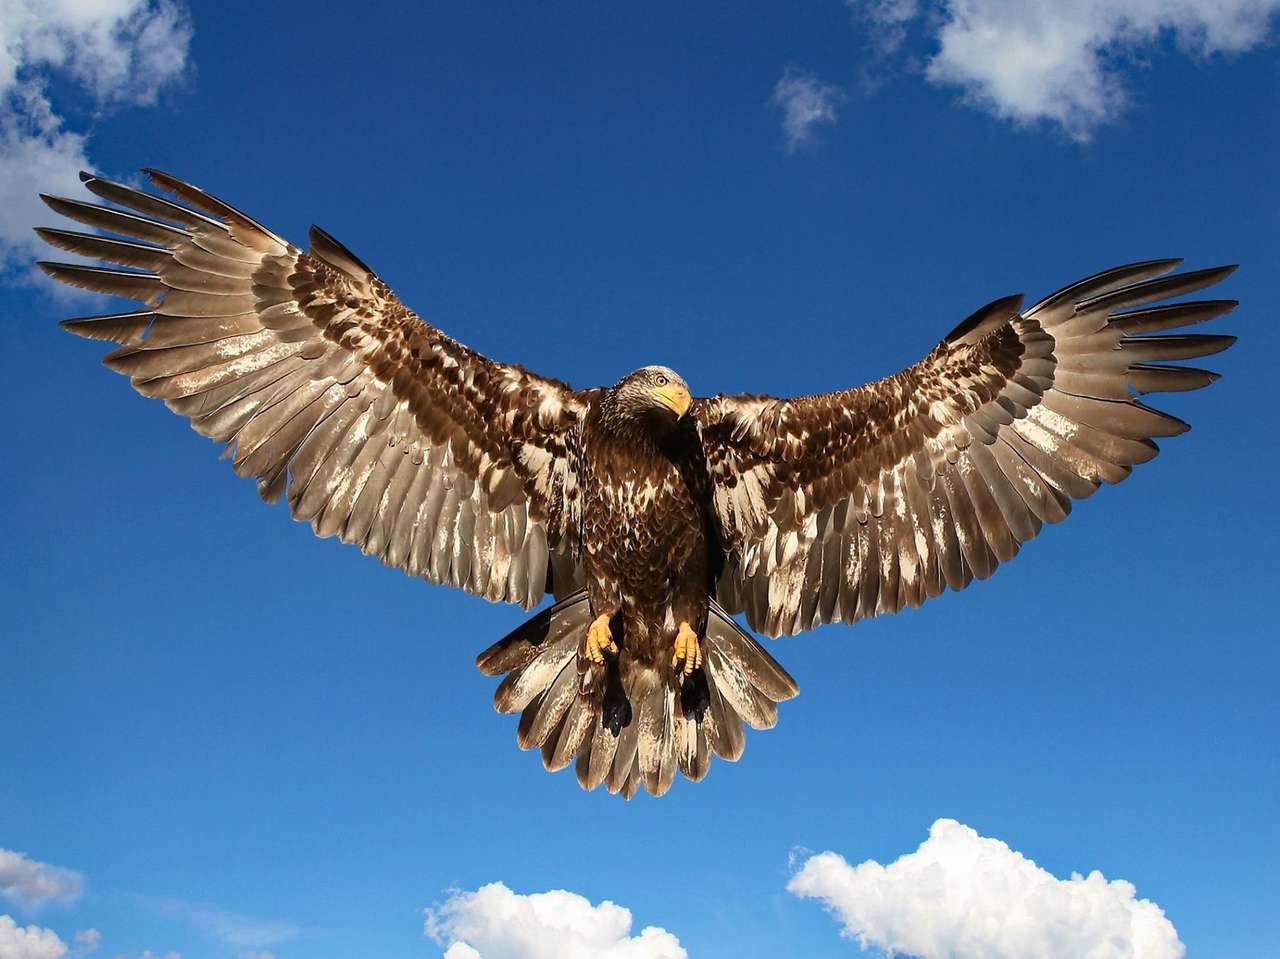 Soaring Hawk puzzle online from photo